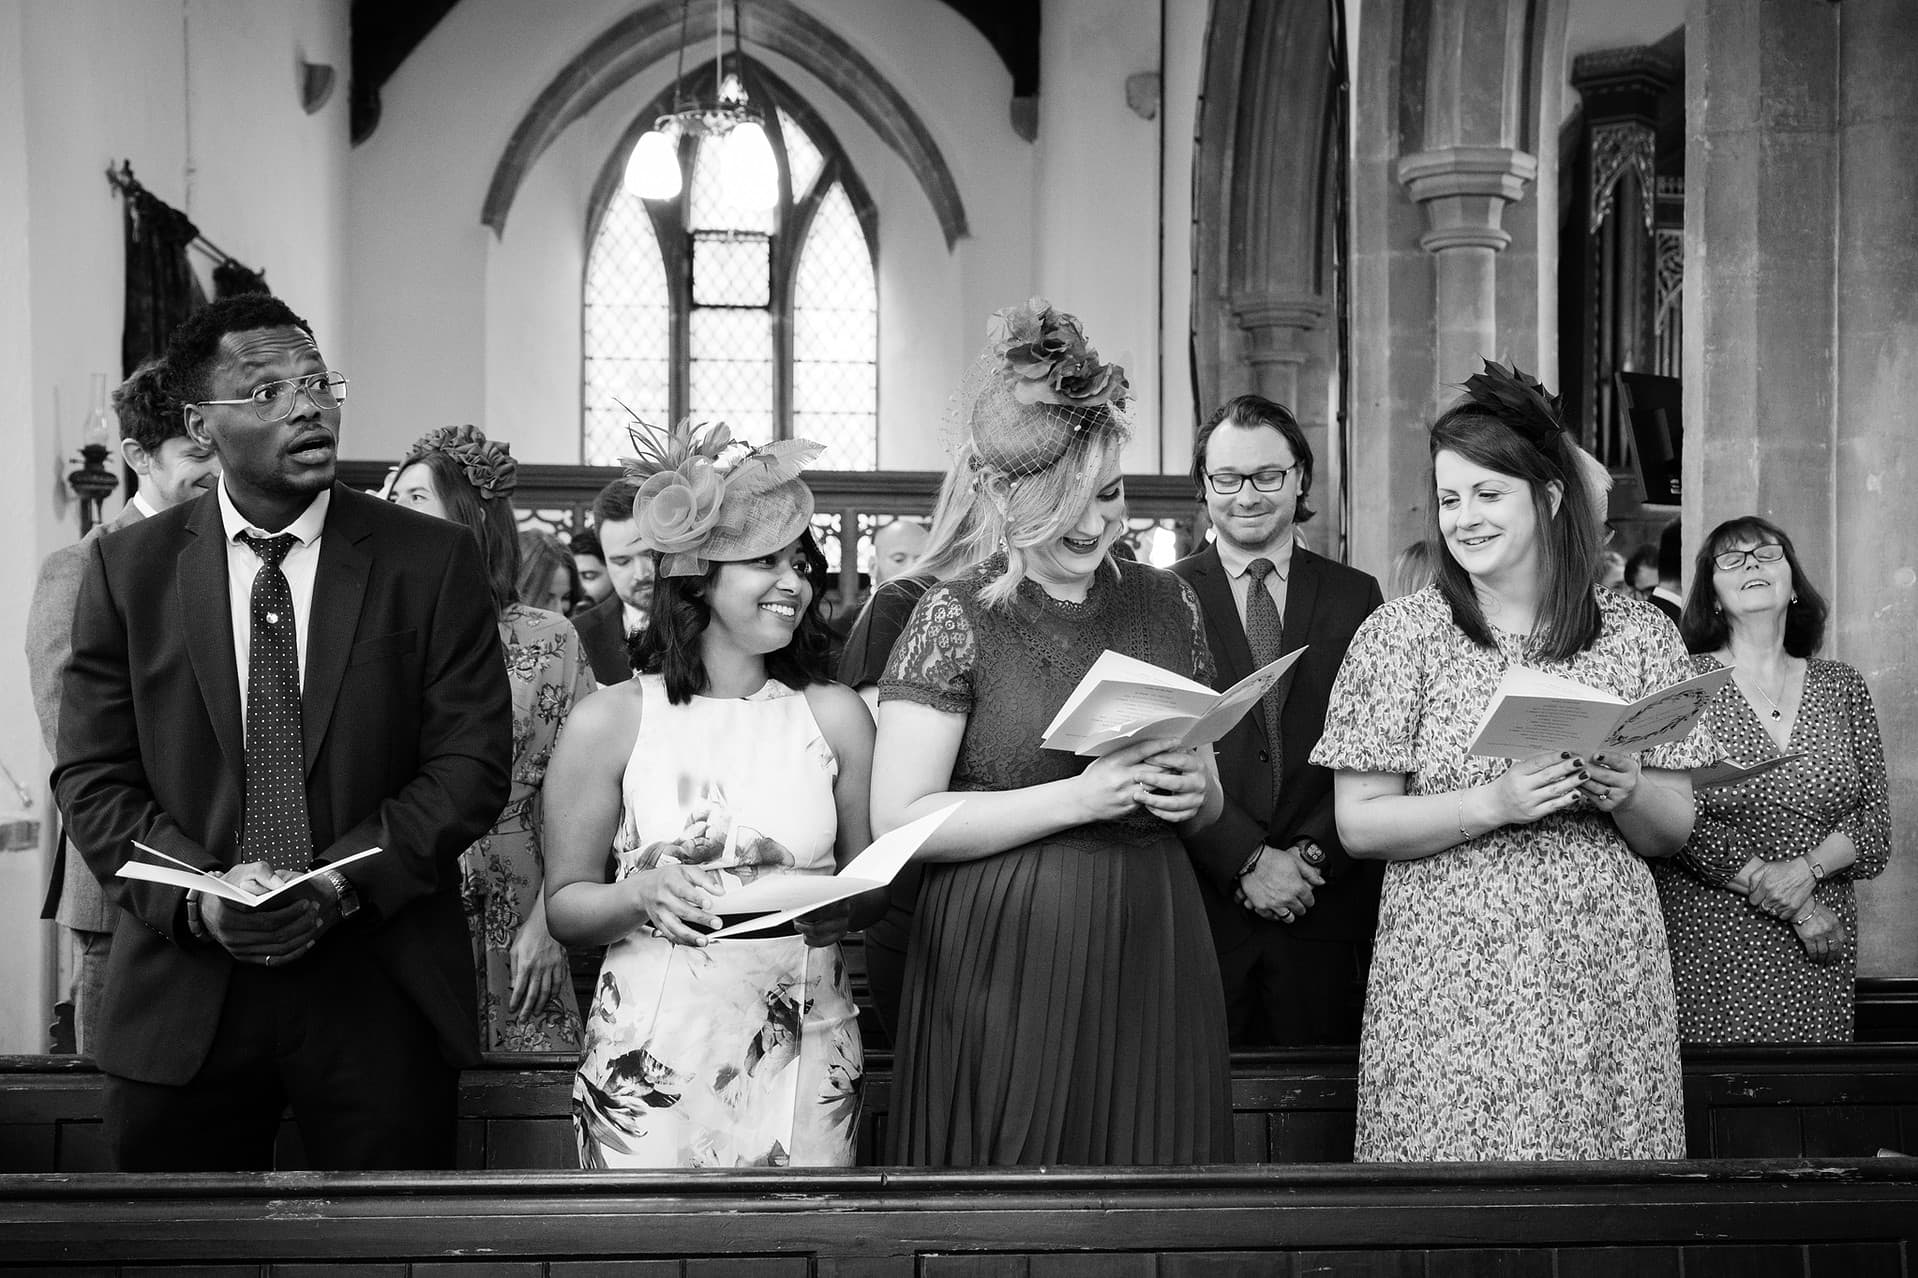 Wedding guests singing hymns at St Catherine's church in Houghton on the Hill